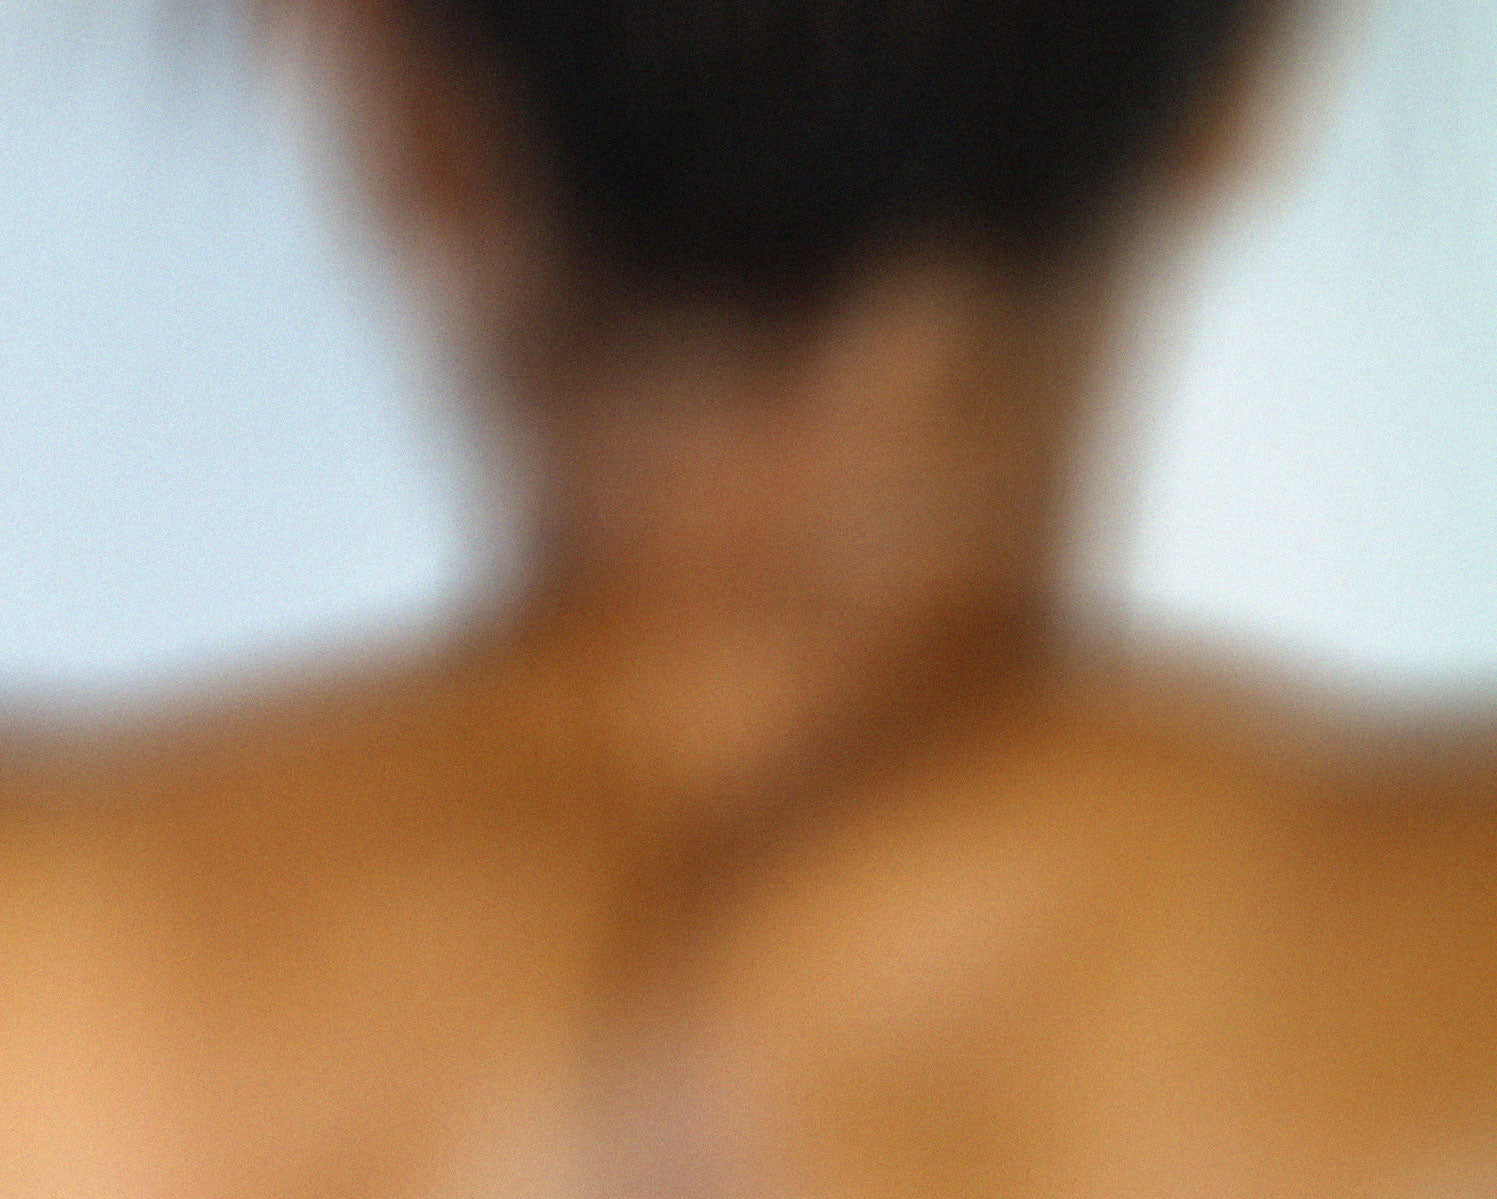 Blurry image of the back-side of a woman's neck and upper back while her brunette hair is tied up.